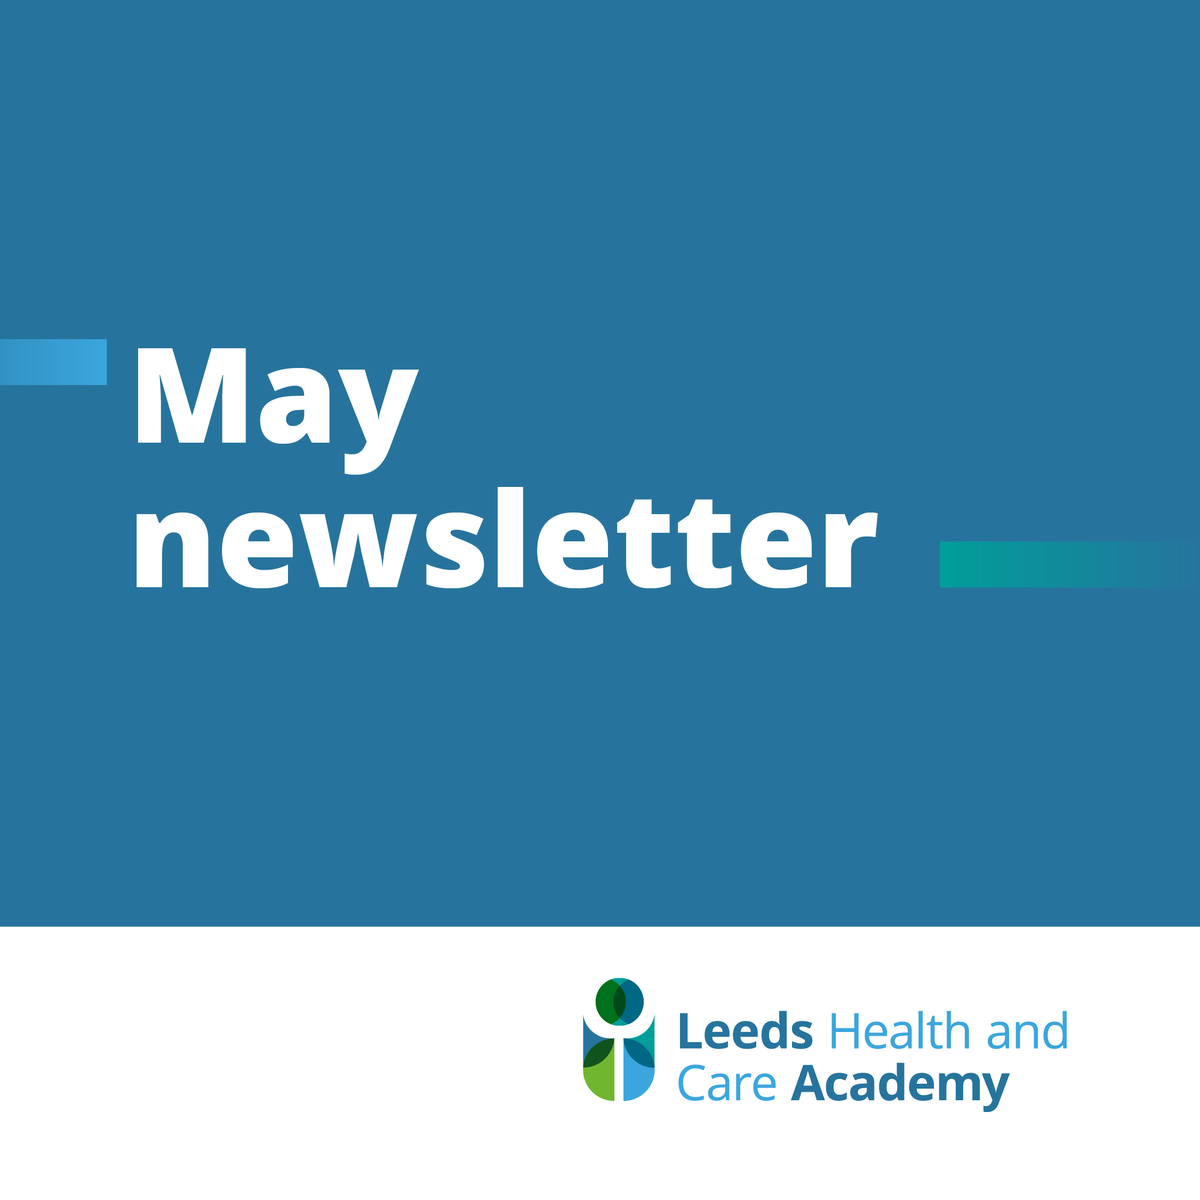 Our May newsletter was sent out last week! This month's newsletter includes details of new apprenticeship opportunities in Pharmacy, plus dates of our upcoming workforce webinars for the third sector and independent care sector. You can read it here: r1.brothermailer1.com/7LTJ-352P-32/s…